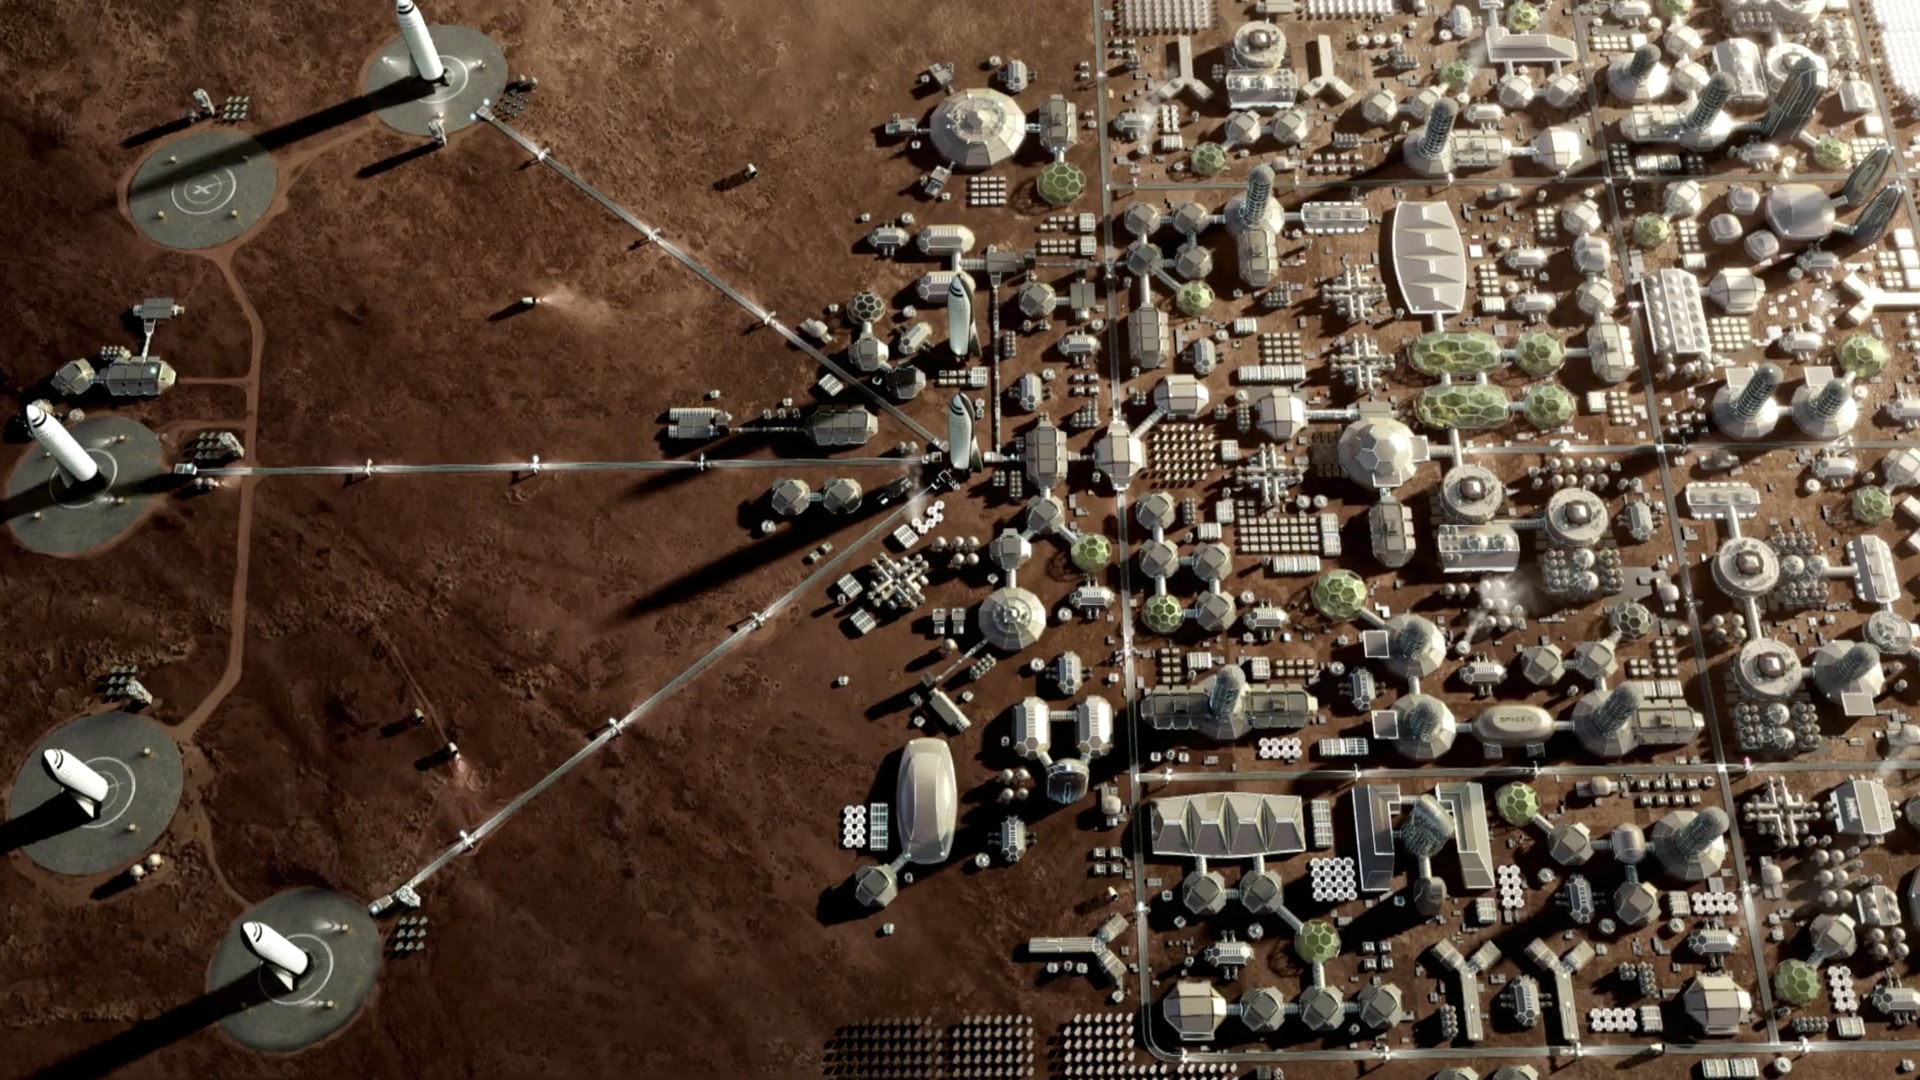 SpaceX plans for a Martian colony